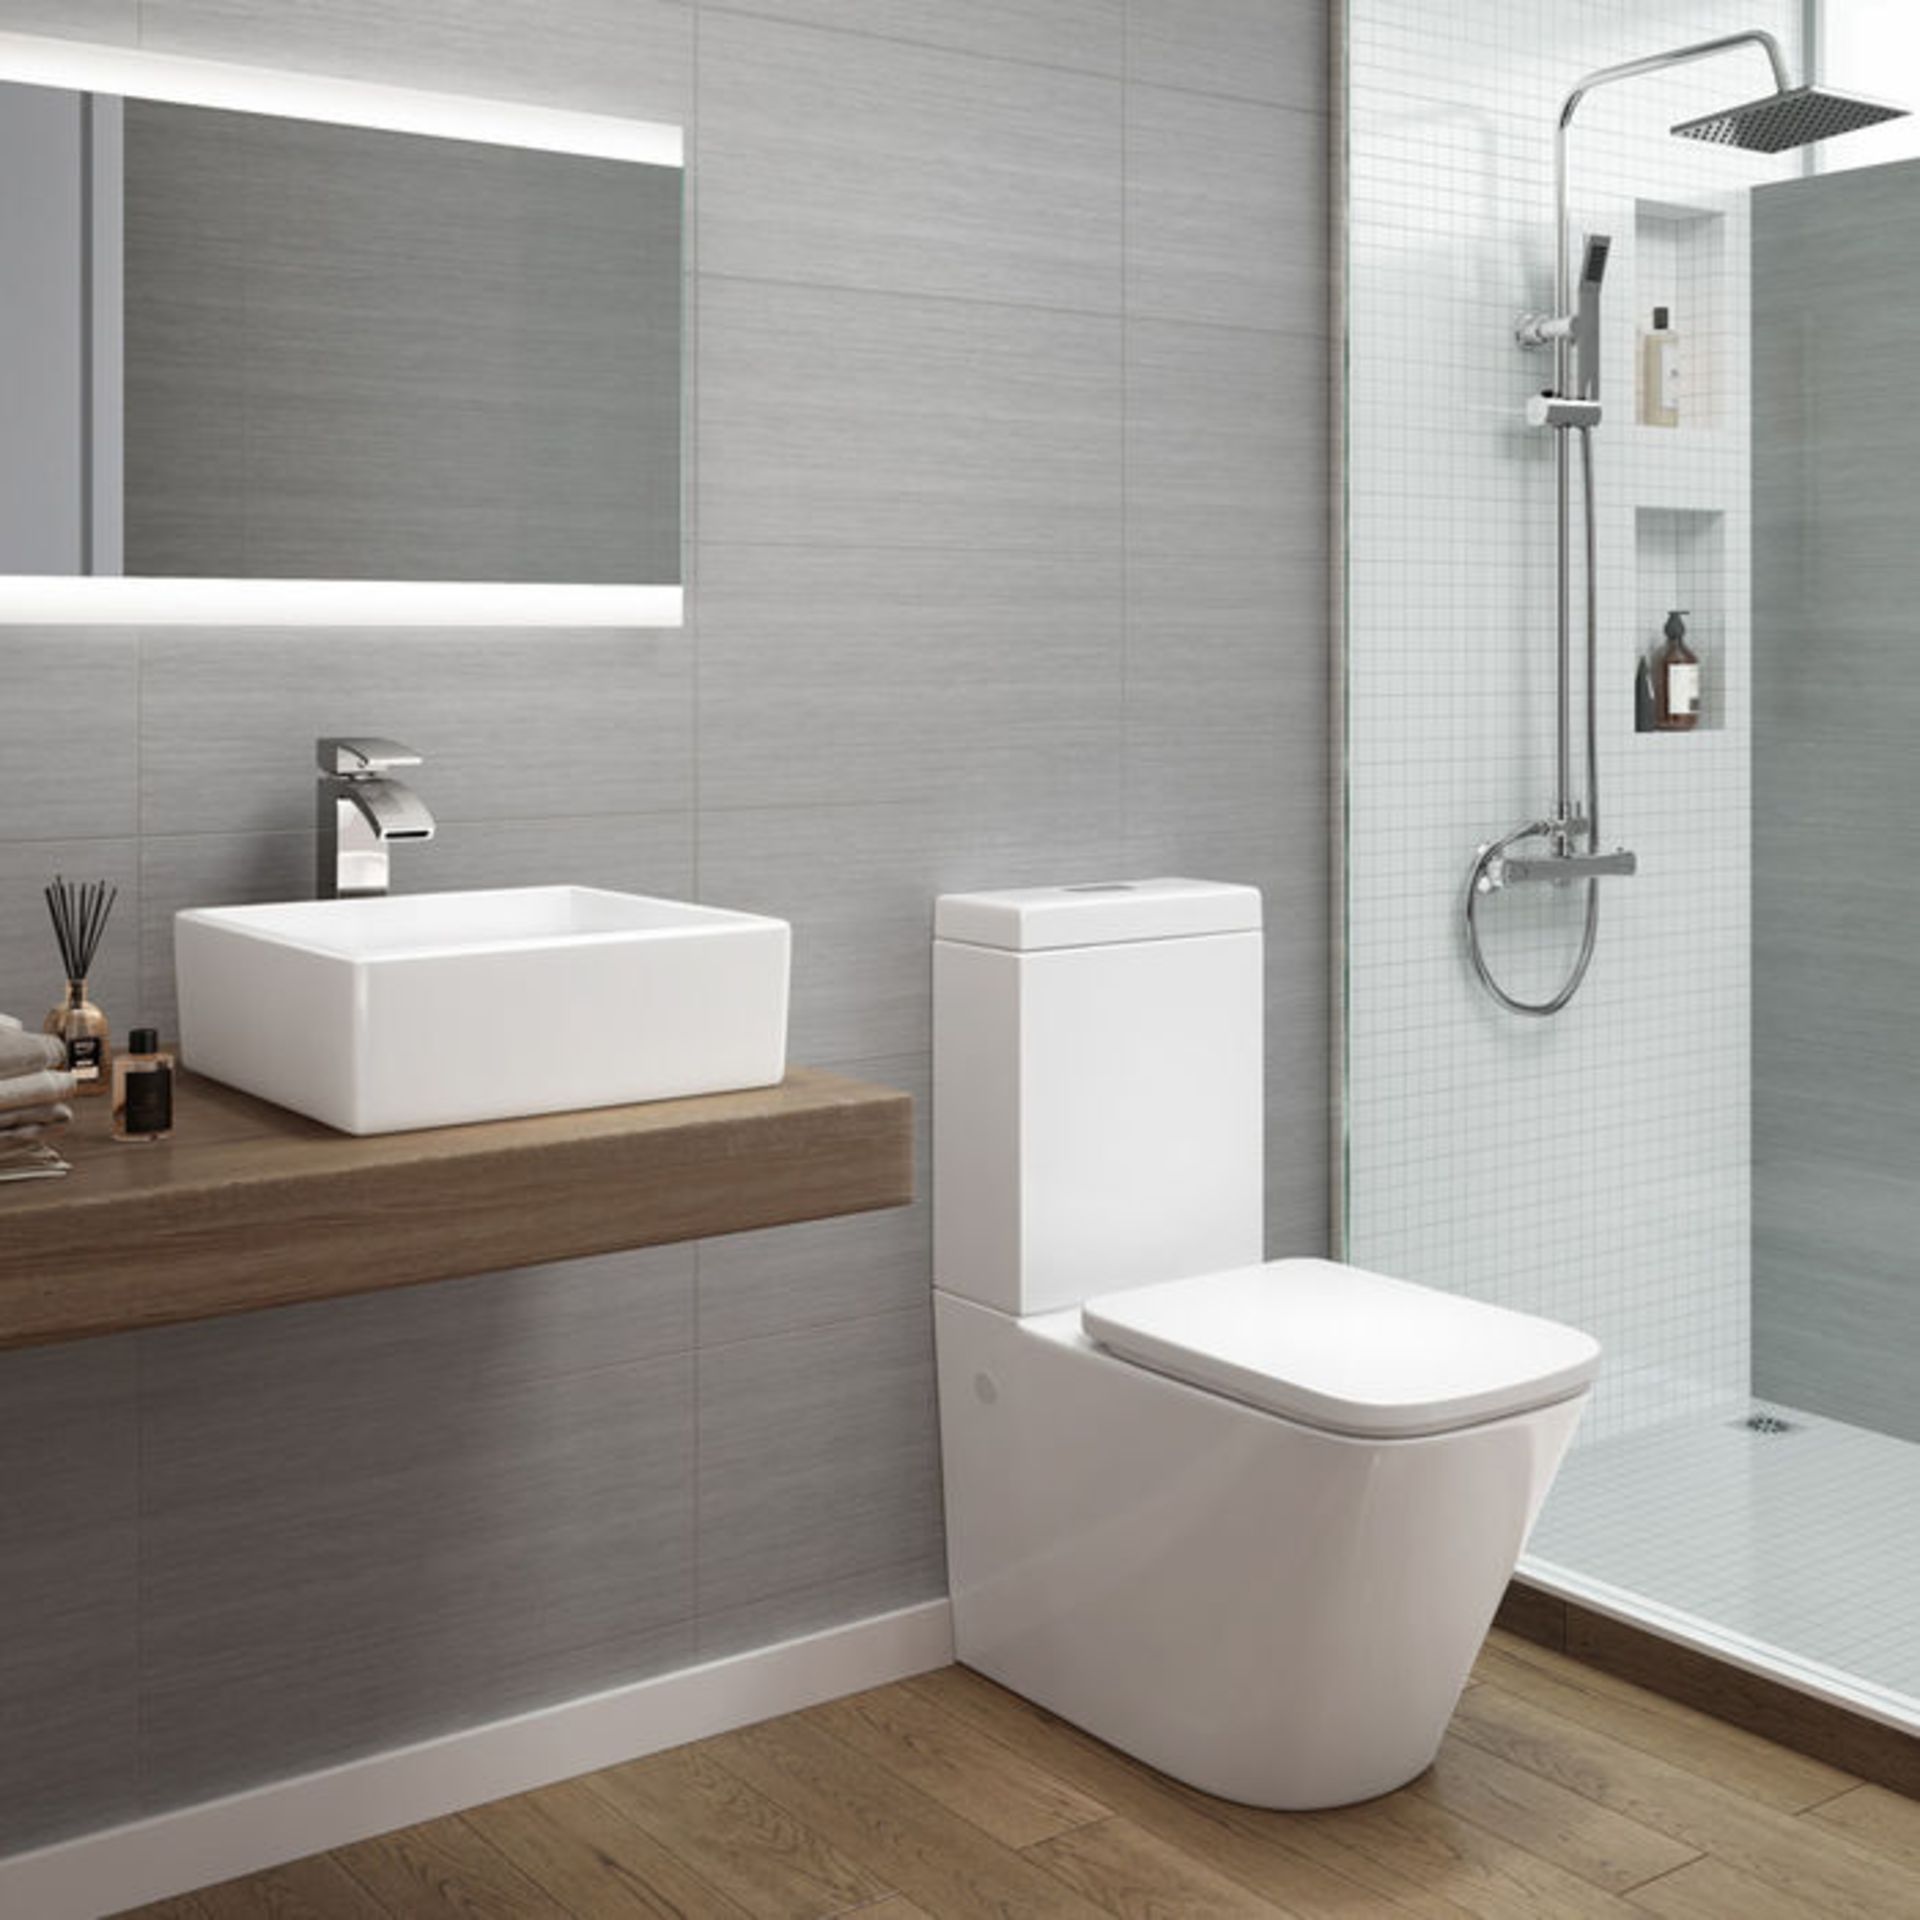 (P254) Florence Close Coupled Toilet & Cistern inc Soft Close Seat. Contemporary design finished - Image 2 of 5